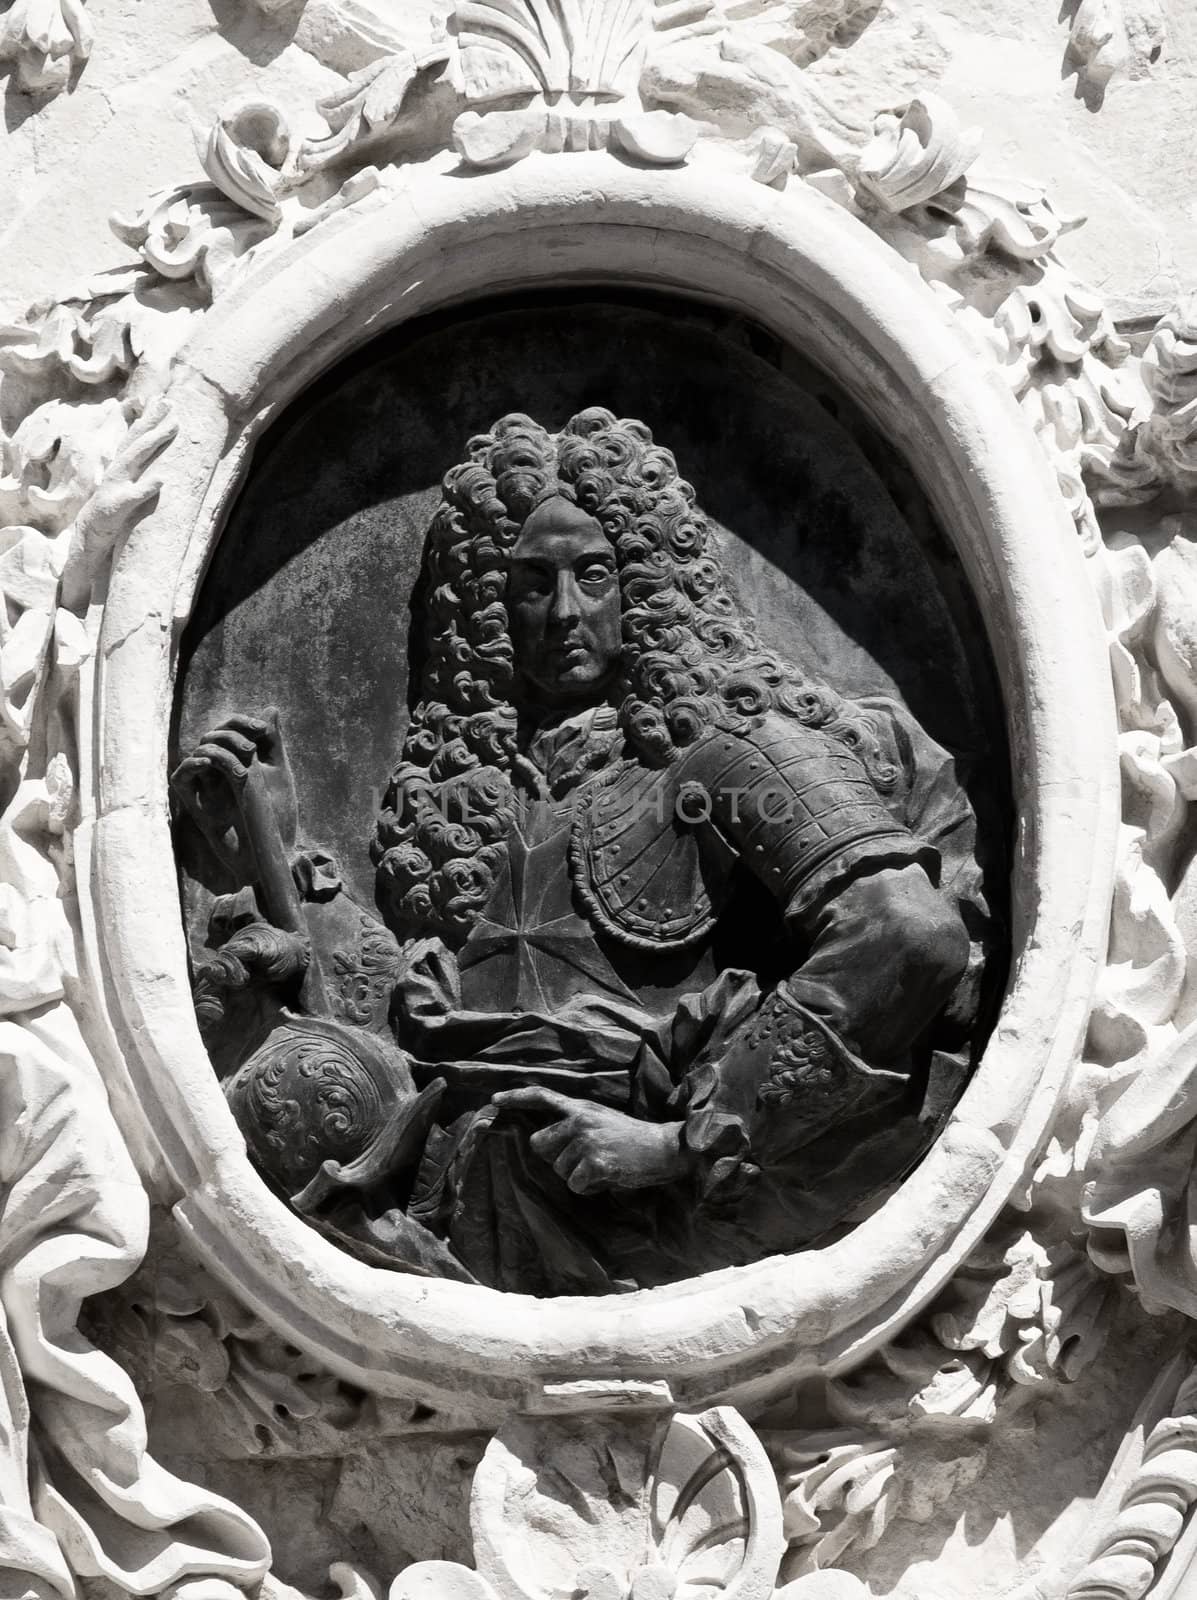 Motif of the Order of St John Grandmaster Vilhena above the entrance to the palace which bears his name in Mdina in Malta